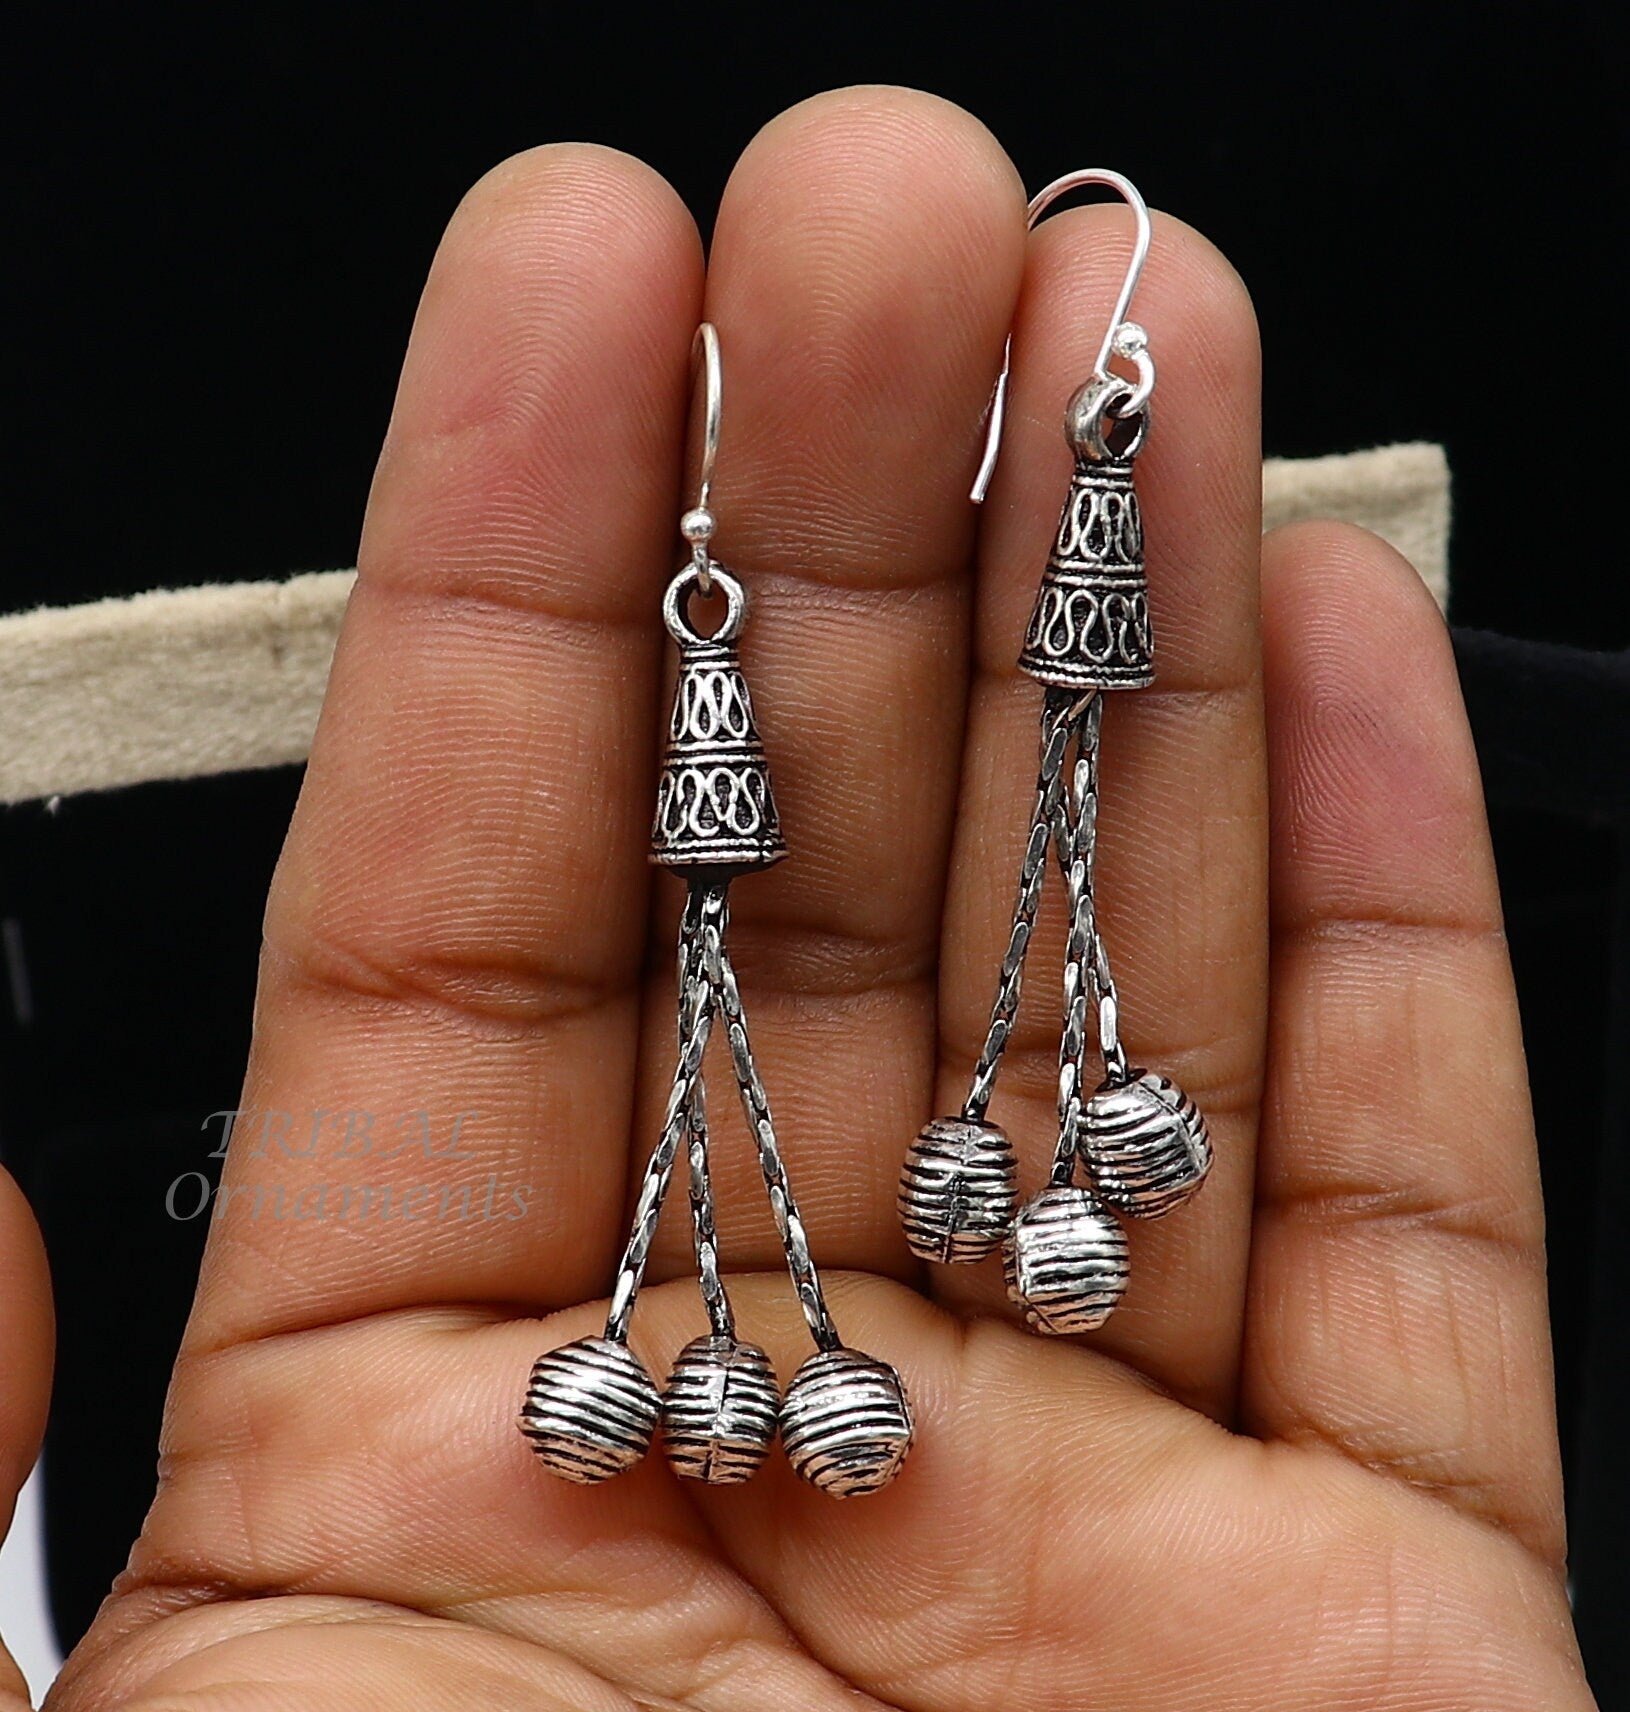 925 sterling silver handmade fabulous Drop dangling hoops earring, stylish customized long earring personalized brides wedding gift s1132 - TRIBAL ORNAMENTS